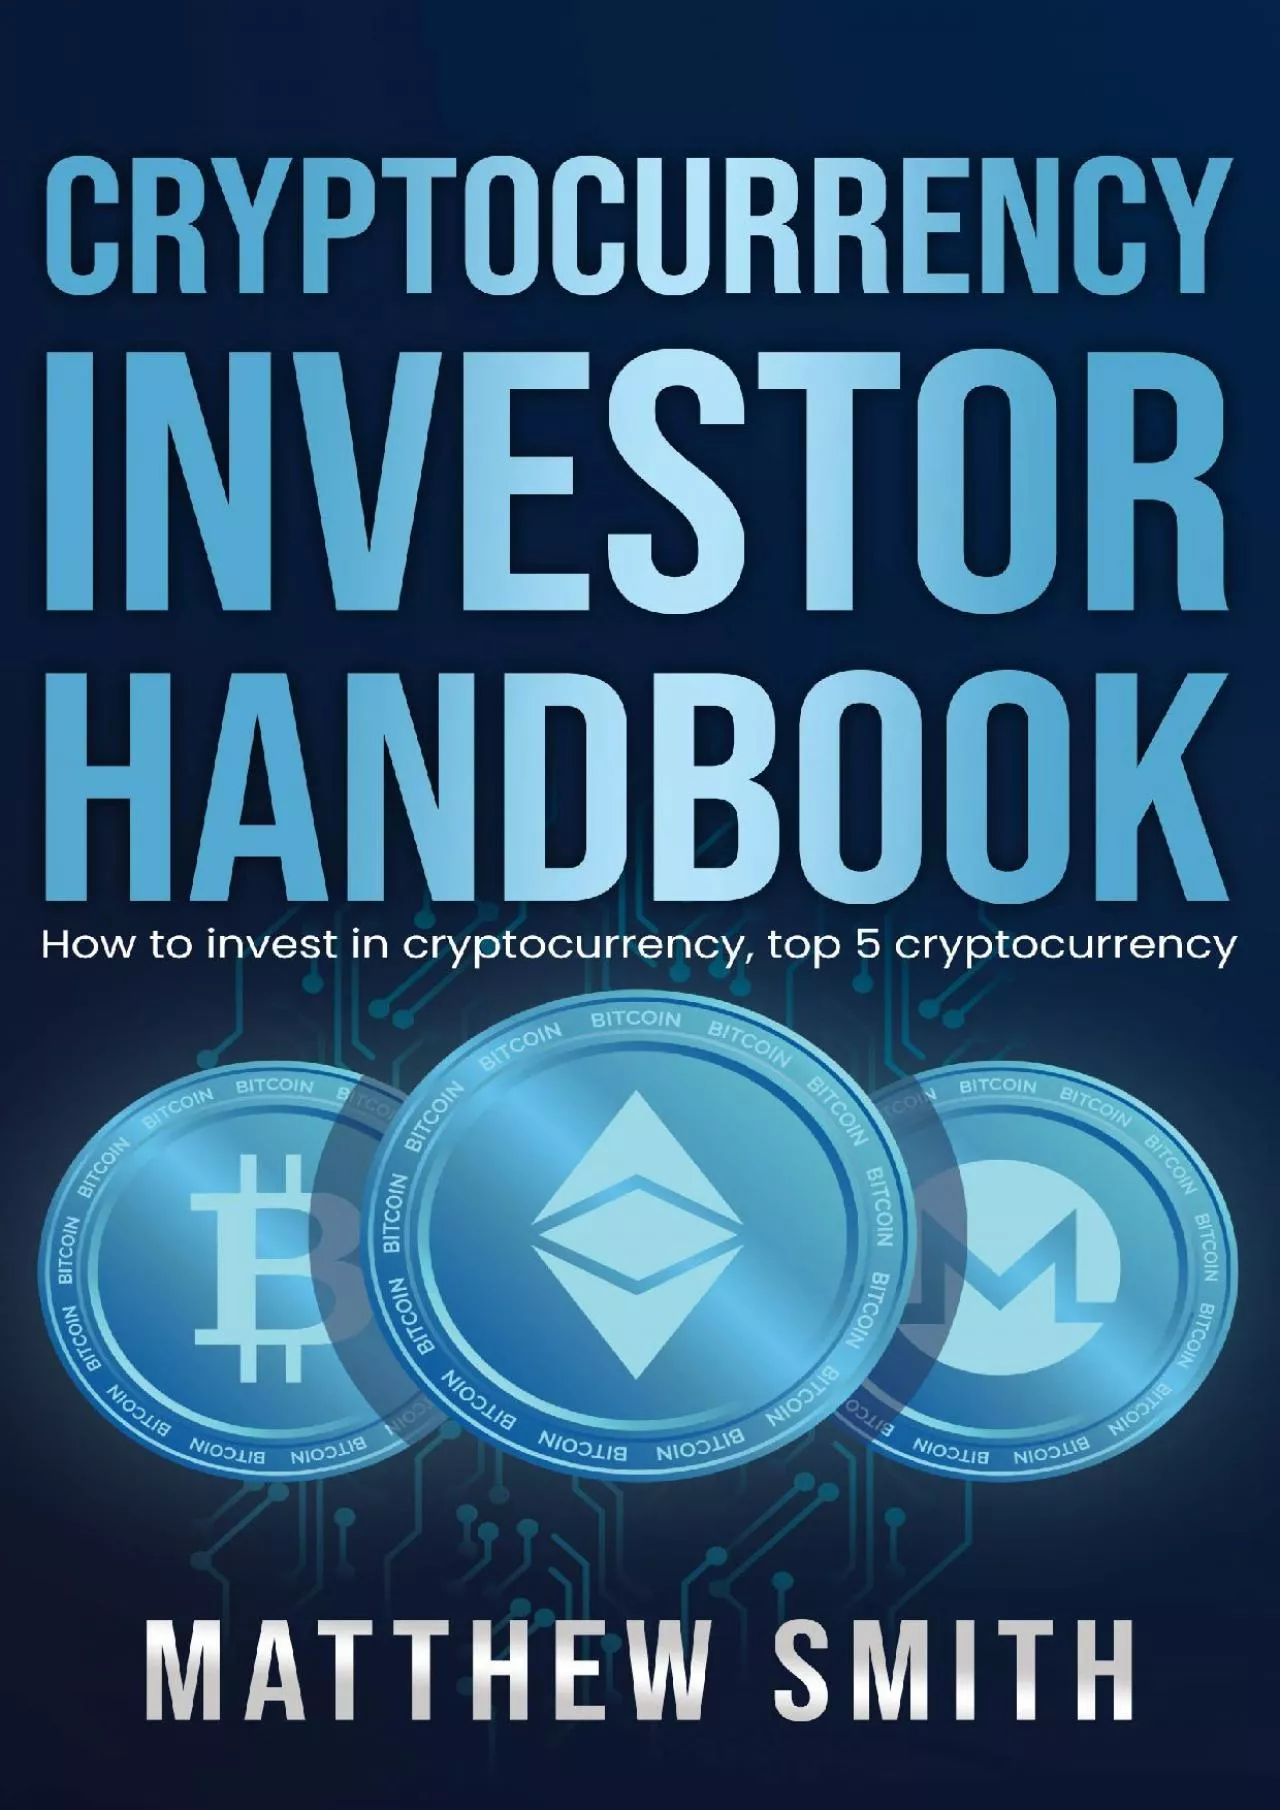 (BOOK)-Cryptocurrency Investor Handbook: How to invest in cryptocurrency, top 5 cryptocurrency